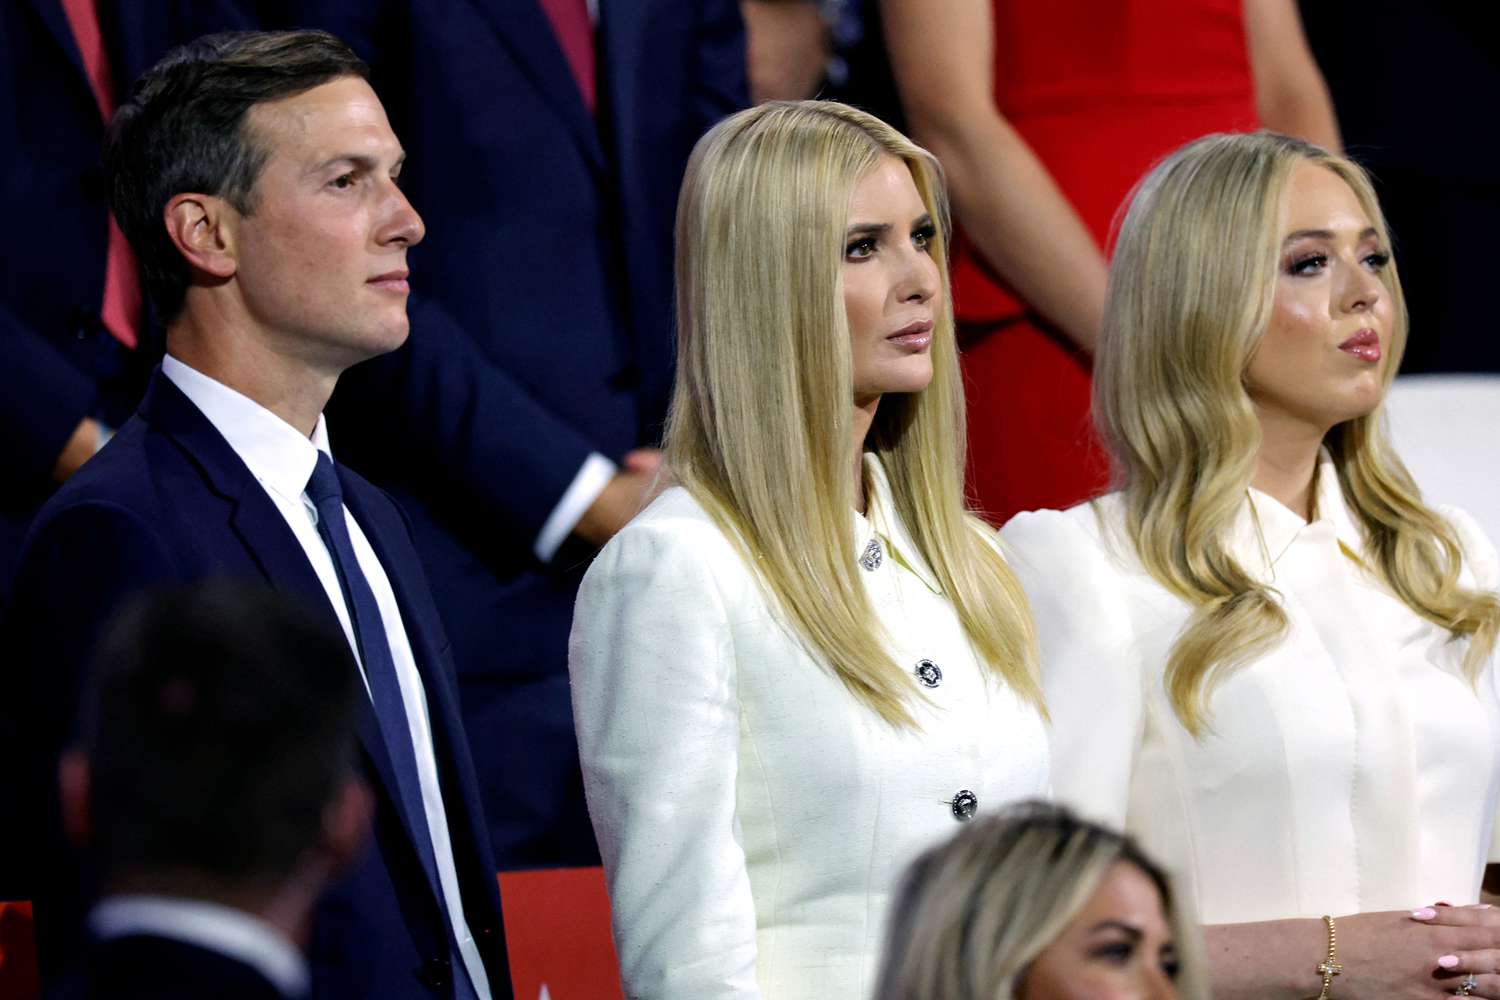 Ivanka Trump Makes Her First Political Appearance Since Father's Presidency at the RNC Finale